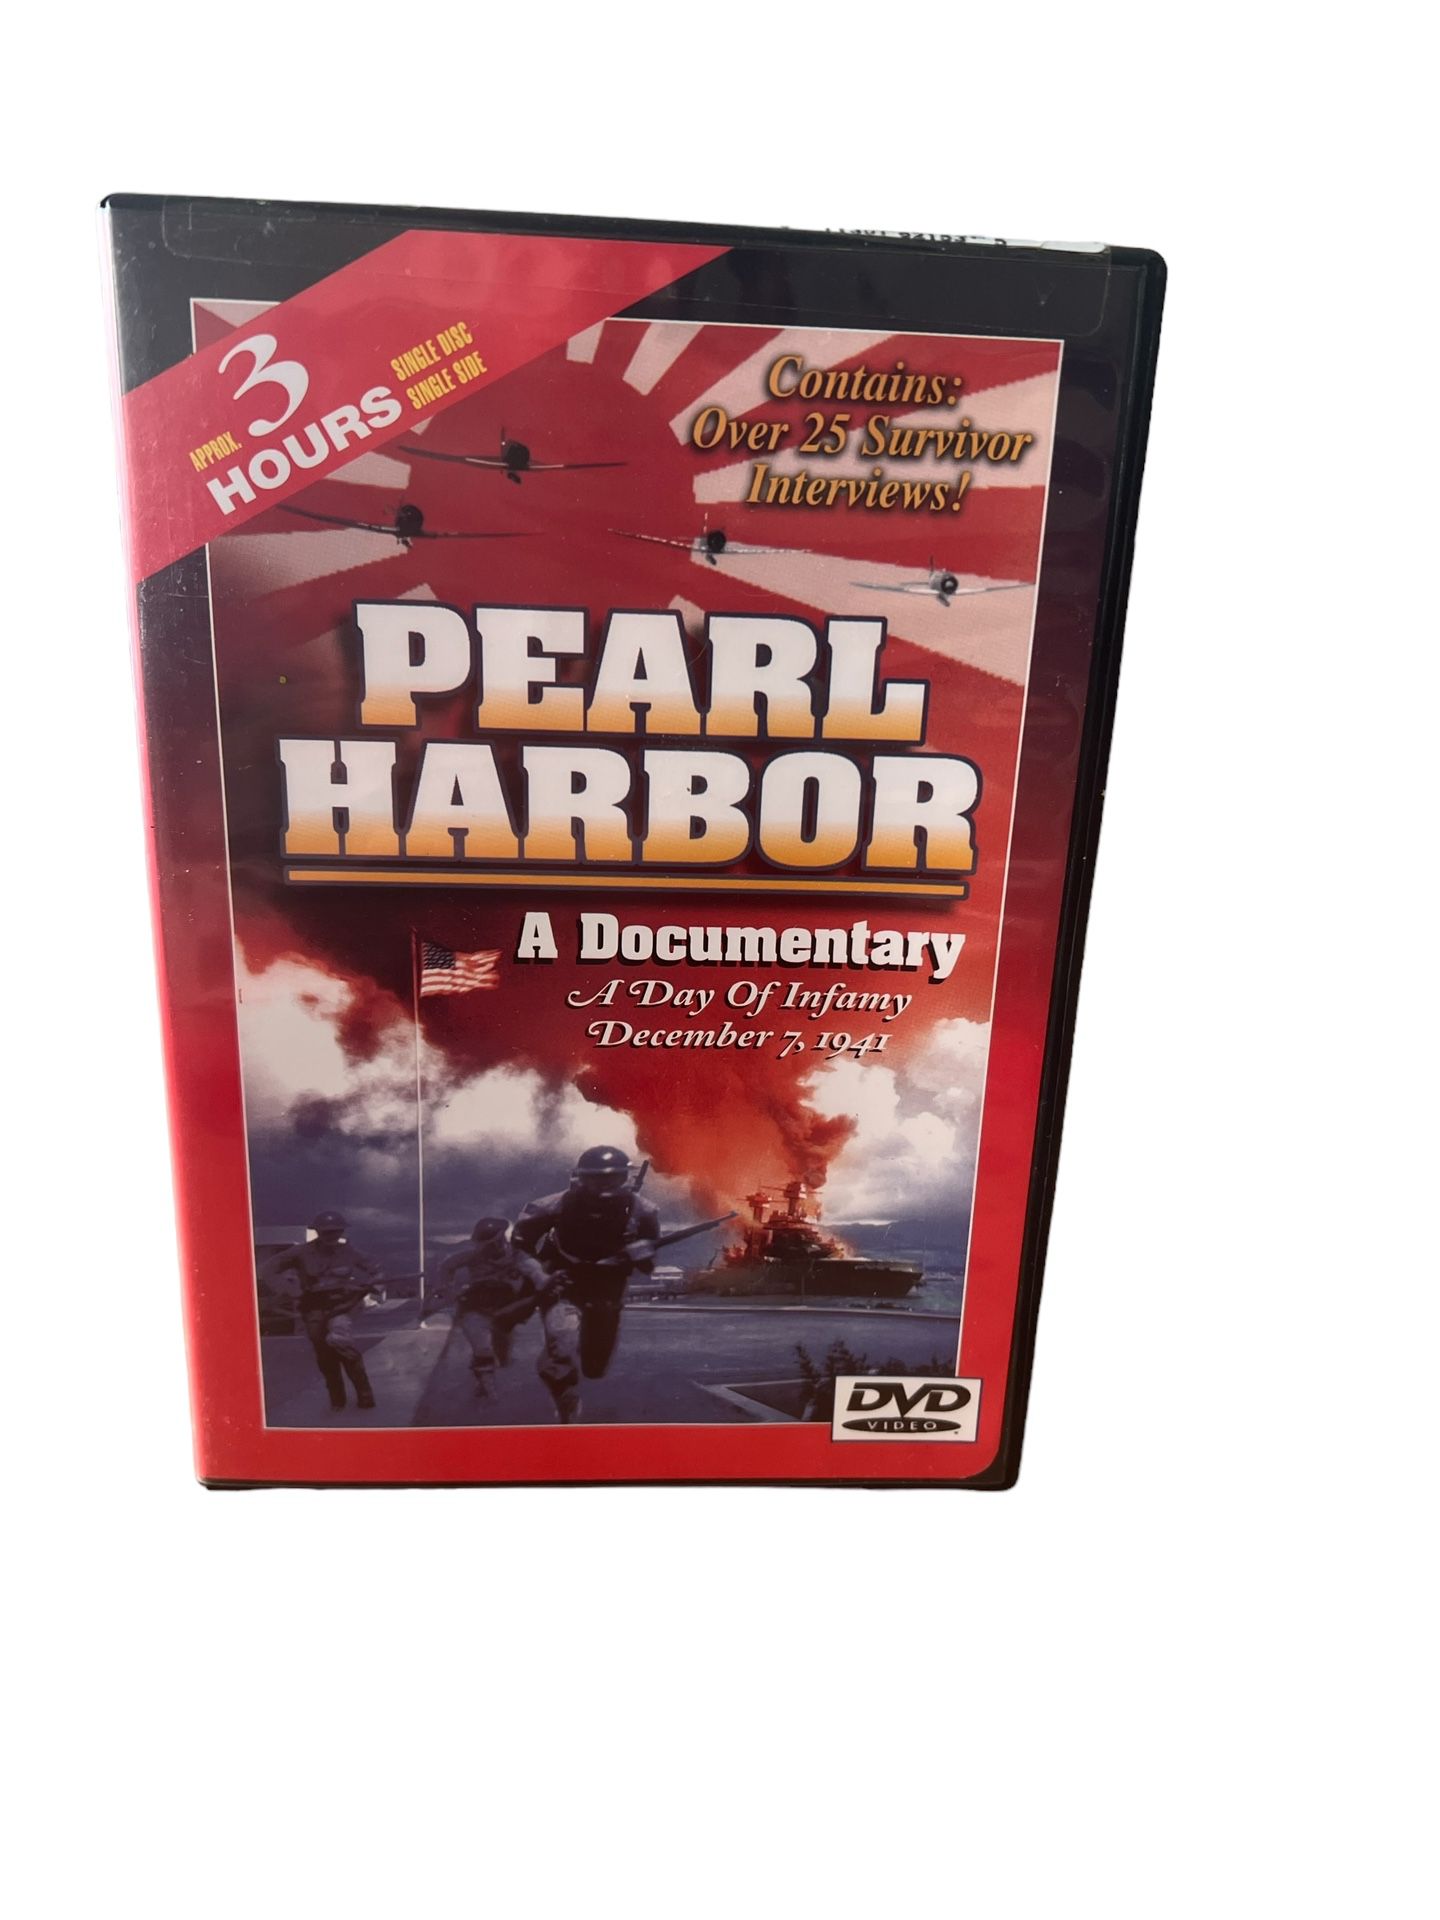 Pearl Harbor 75th Anniversary Collection: 16 Features (DVD